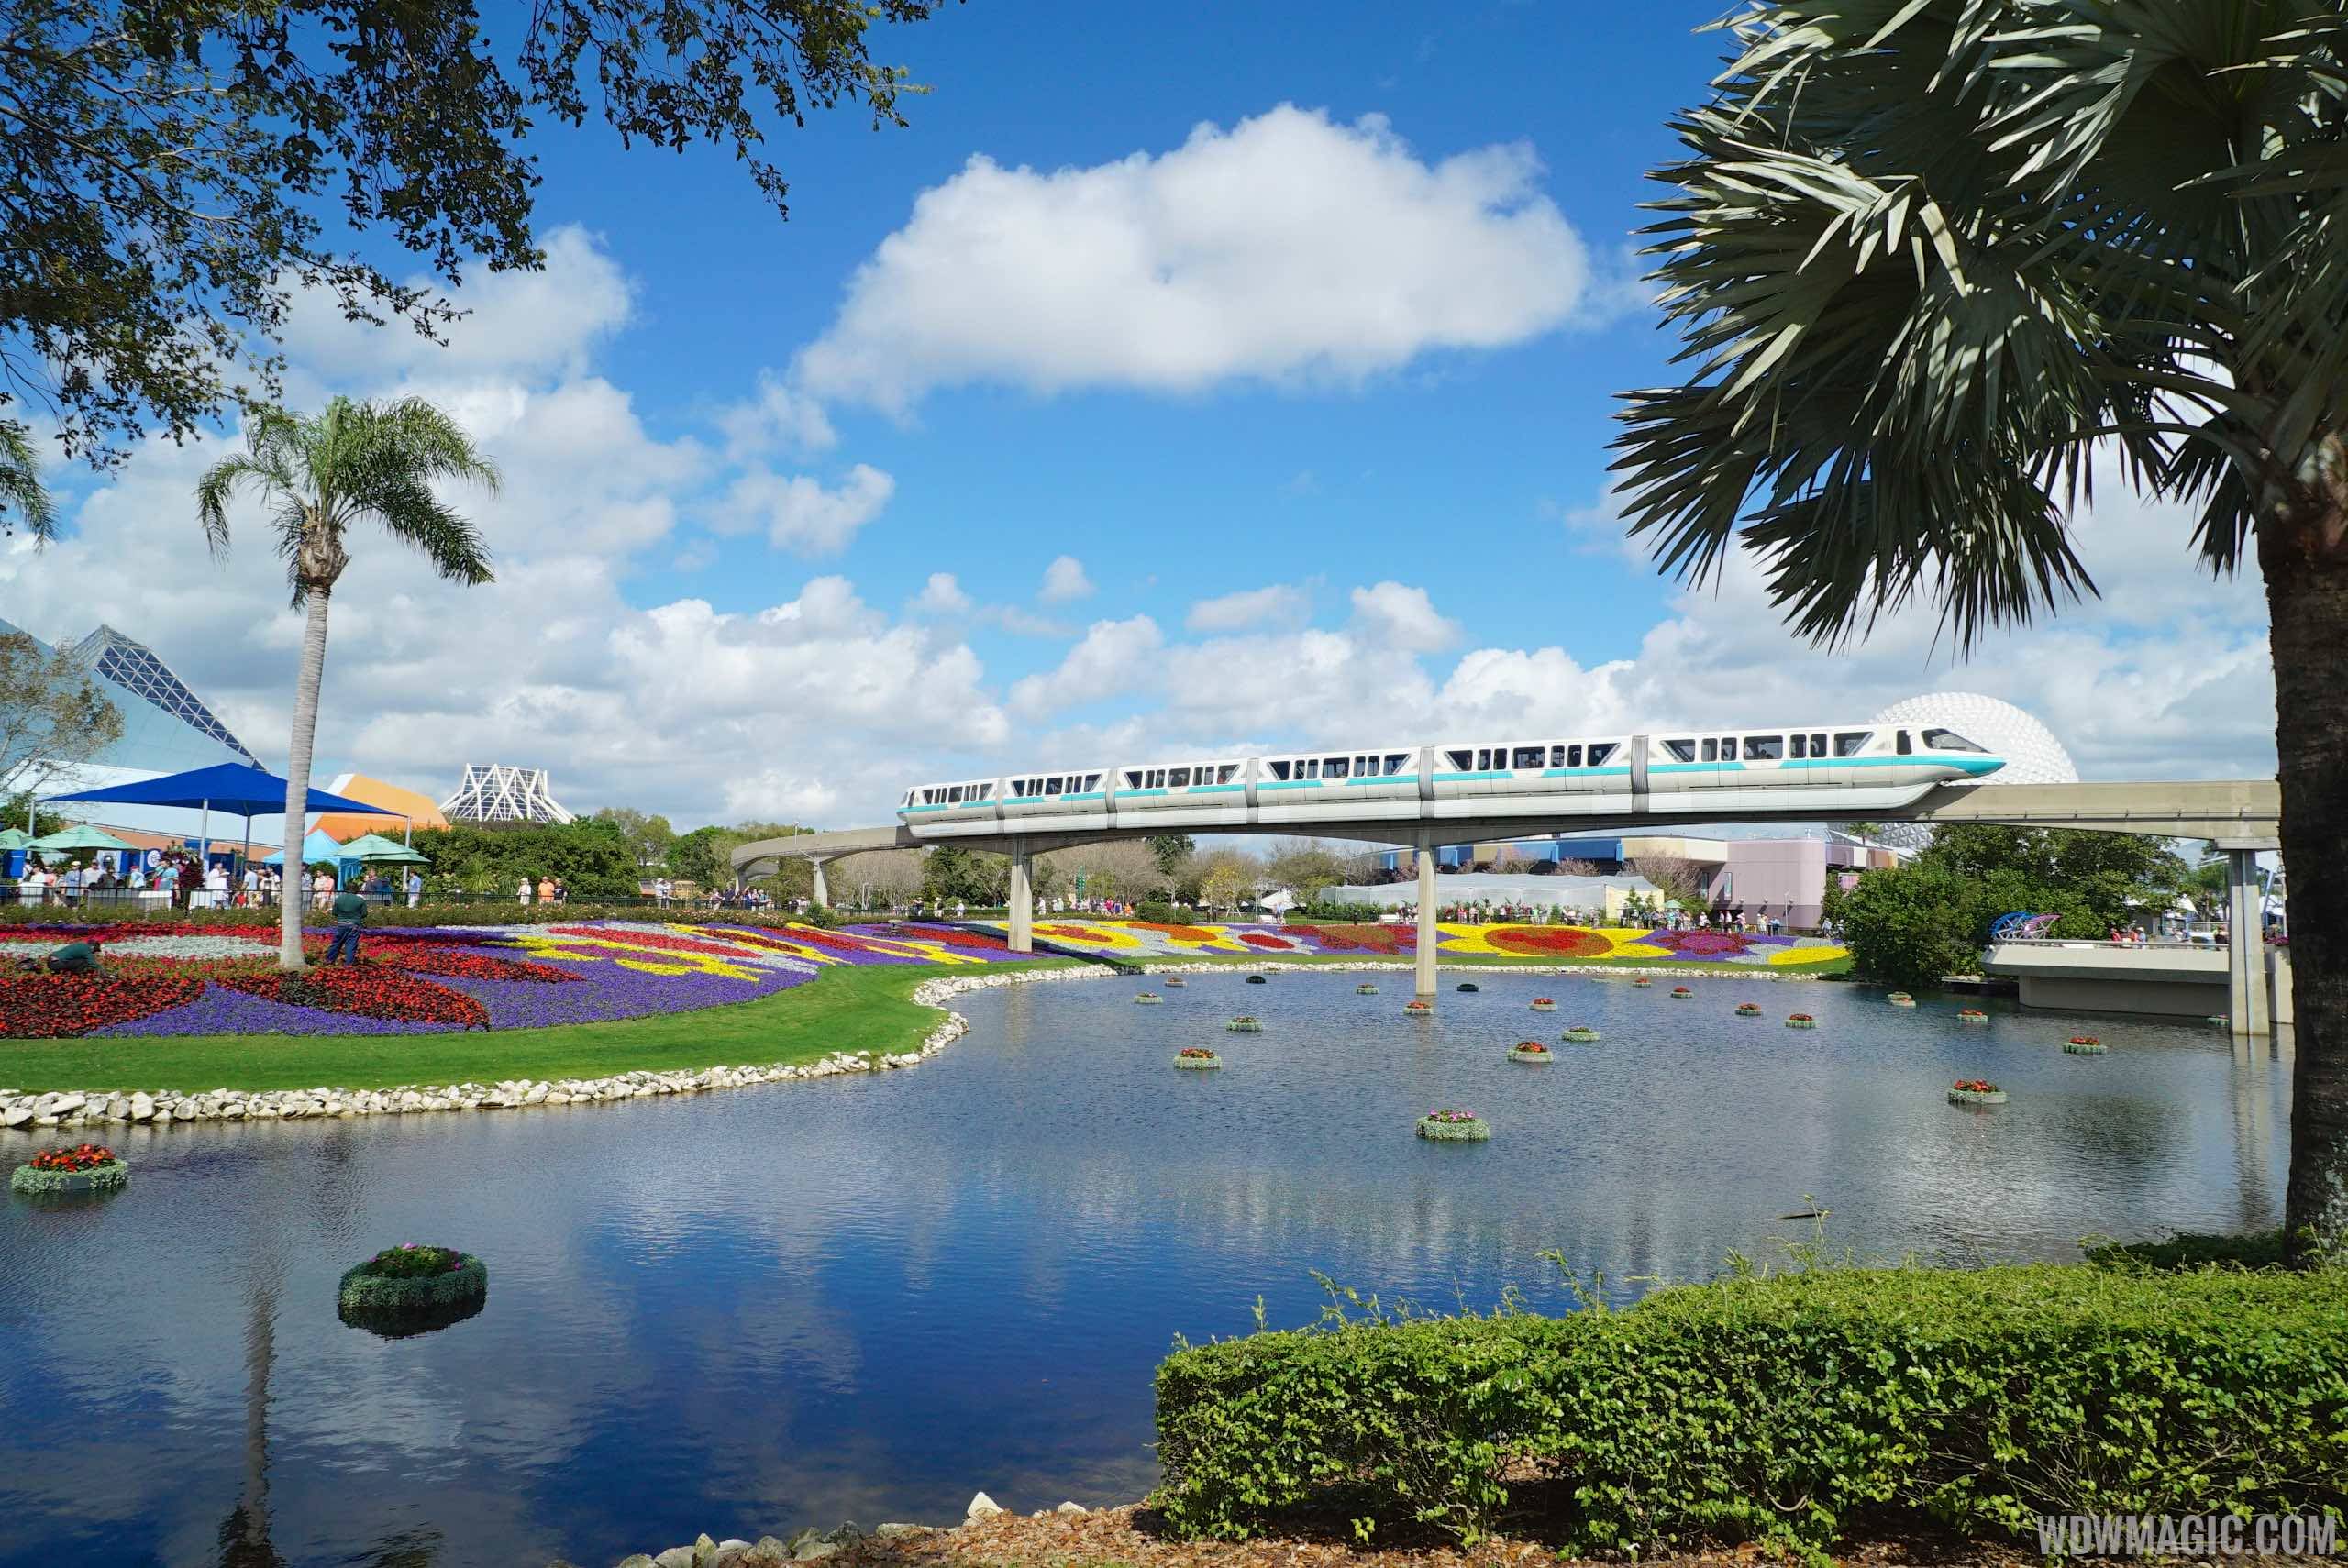 2015 Epcot Flower and Garden Festival - Monorail